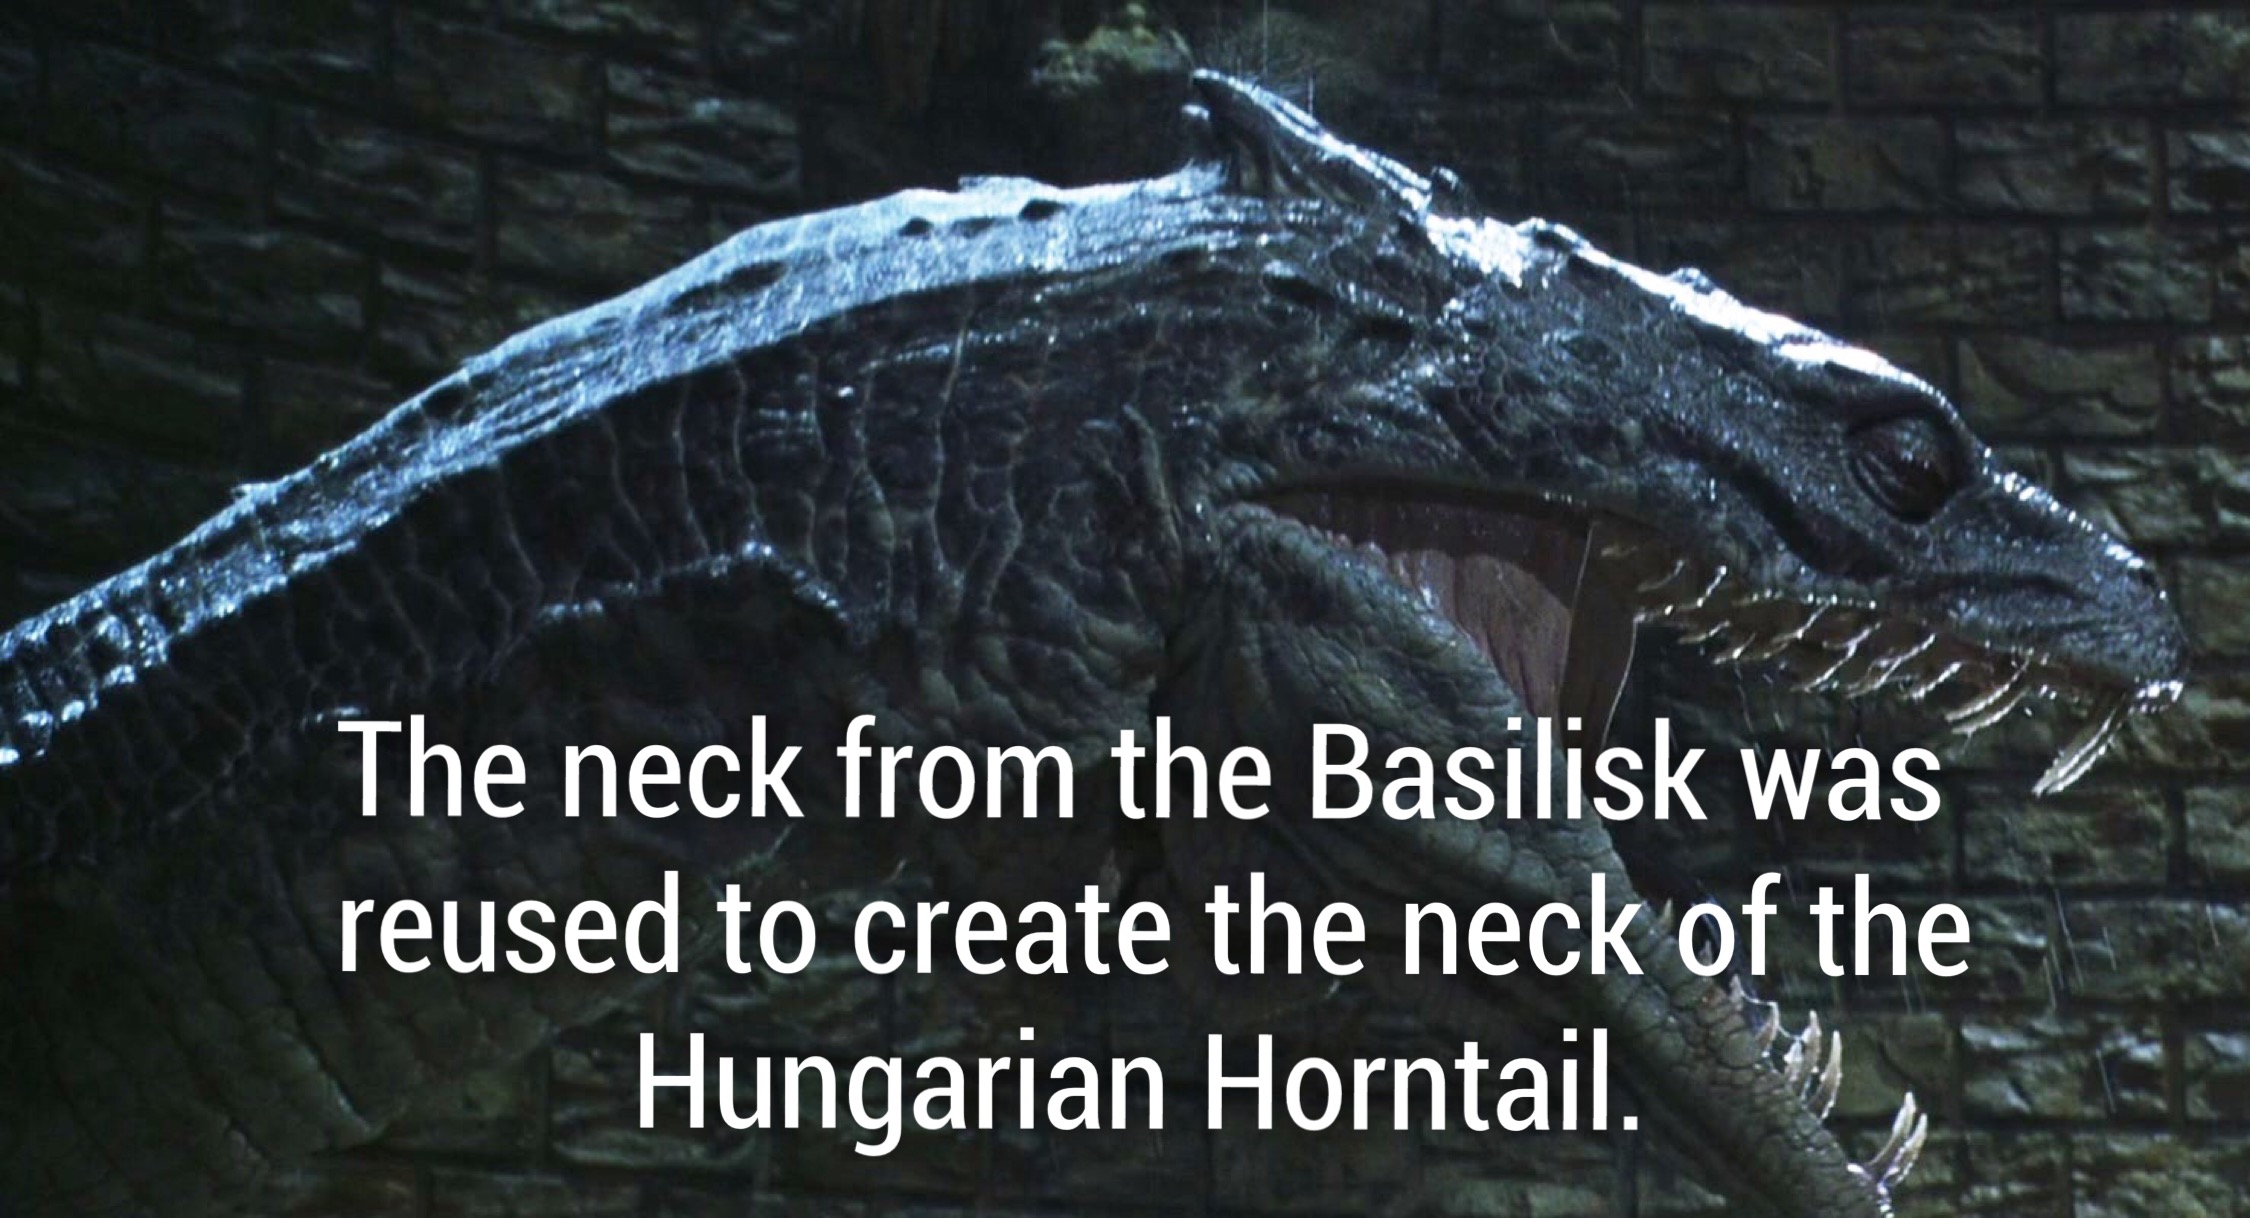 harry potter and the chamber of secrets basilisk - The neck from the Basilisk was reused to create the neck of the Hungarian Horntail.